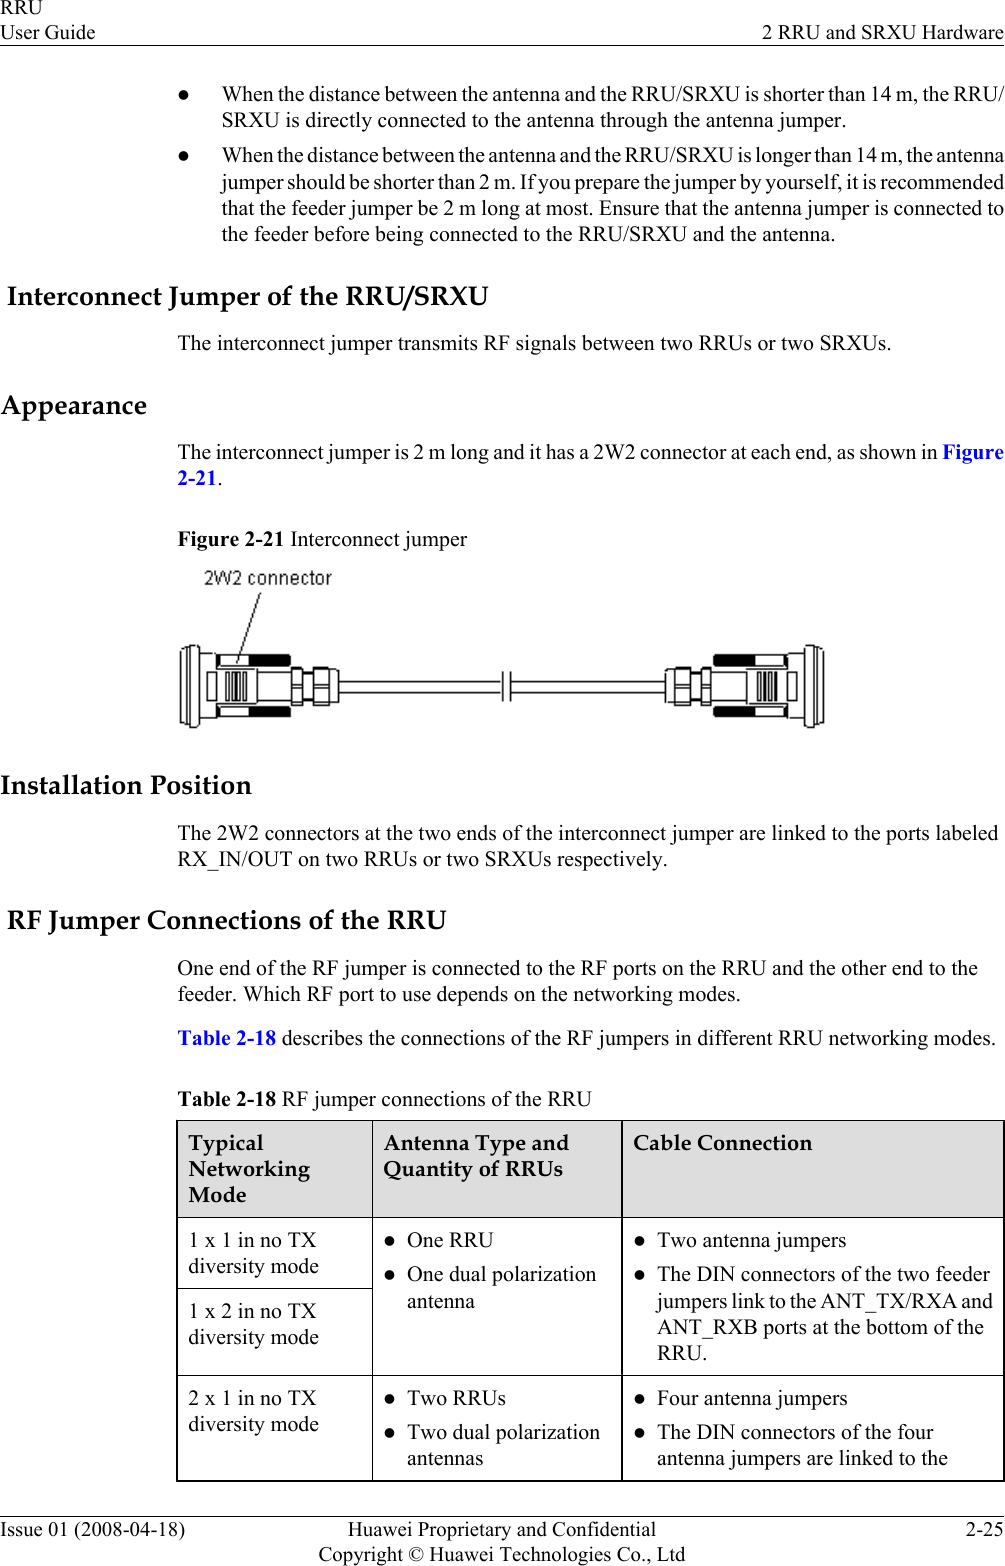 lWhen the distance between the antenna and the RRU/SRXU is shorter than 14 m, the RRU/SRXU is directly connected to the antenna through the antenna jumper.lWhen the distance between the antenna and the RRU/SRXU is longer than 14 m, the antennajumper should be shorter than 2 m. If you prepare the jumper by yourself, it is recommendedthat the feeder jumper be 2 m long at most. Ensure that the antenna jumper is connected tothe feeder before being connected to the RRU/SRXU and the antenna. Interconnect Jumper of the RRU/SRXUThe interconnect jumper transmits RF signals between two RRUs or two SRXUs.AppearanceThe interconnect jumper is 2 m long and it has a 2W2 connector at each end, as shown in Figure2-21.Figure 2-21 Interconnect jumperInstallation PositionThe 2W2 connectors at the two ends of the interconnect jumper are linked to the ports labeledRX_IN/OUT on two RRUs or two SRXUs respectively. RF Jumper Connections of the RRUOne end of the RF jumper is connected to the RF ports on the RRU and the other end to thefeeder. Which RF port to use depends on the networking modes.Table 2-18 describes the connections of the RF jumpers in different RRU networking modes.Table 2-18 RF jumper connections of the RRUTypicalNetworkingModeAntenna Type andQuantity of RRUsCable Connection1 x 1 in no TXdiversity modelOne RRUlOne dual polarizationantennalTwo antenna jumperslThe DIN connectors of the two feederjumpers link to the ANT_TX/RXA andANT_RXB ports at the bottom of theRRU.1 x 2 in no TXdiversity mode2 x 1 in no TXdiversity modelTwo RRUslTwo dual polarizationantennaslFour antenna jumperslThe DIN connectors of the fourantenna jumpers are linked to theRRUUser Guide 2 RRU and SRXU HardwareIssue 01 (2008-04-18) Huawei Proprietary and ConfidentialCopyright © Huawei Technologies Co., Ltd2-25